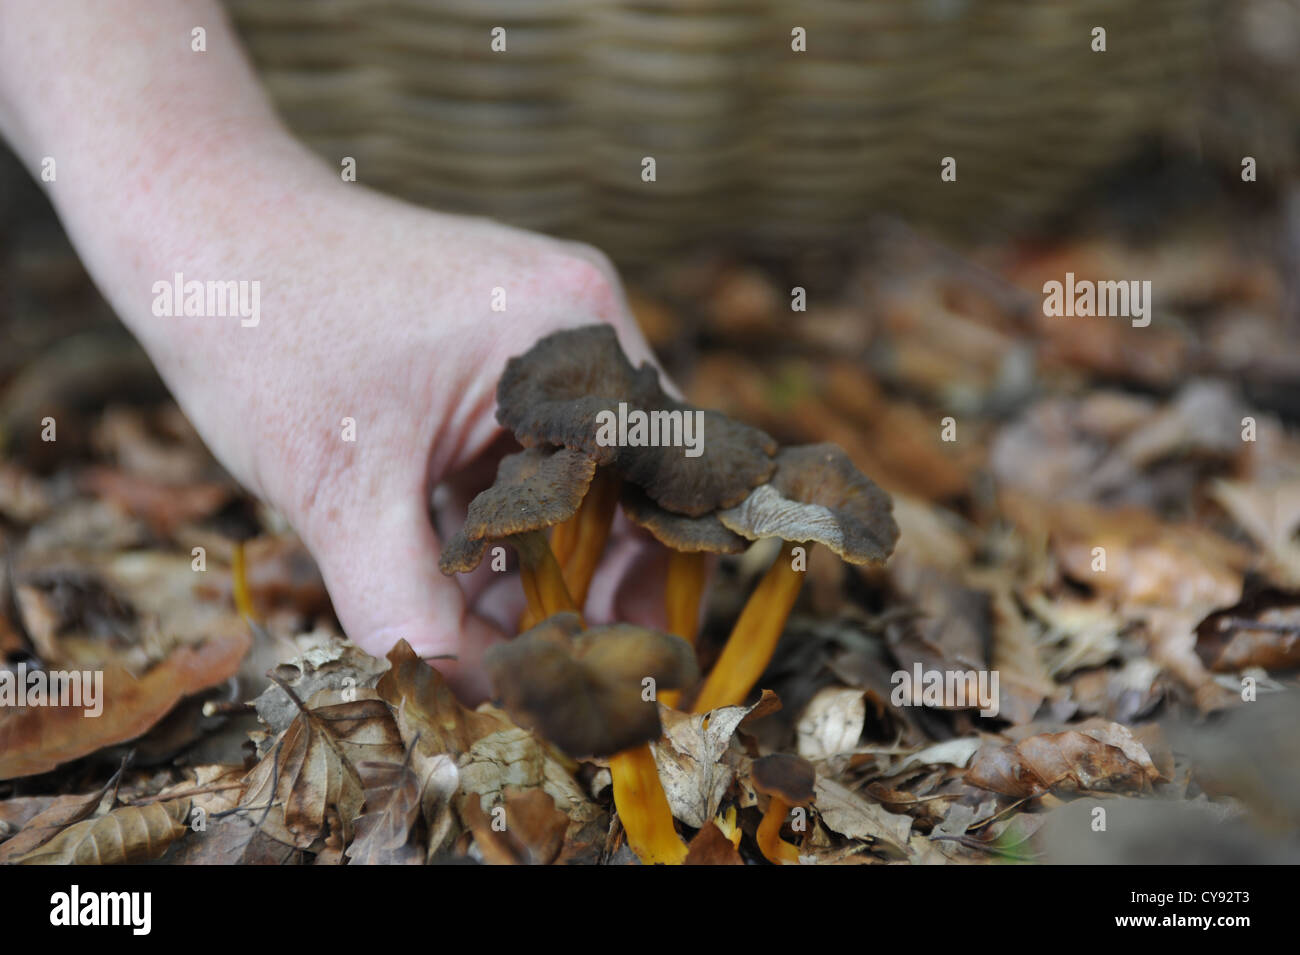 Foraged mushrooms and other wild forest produce Stock Photo